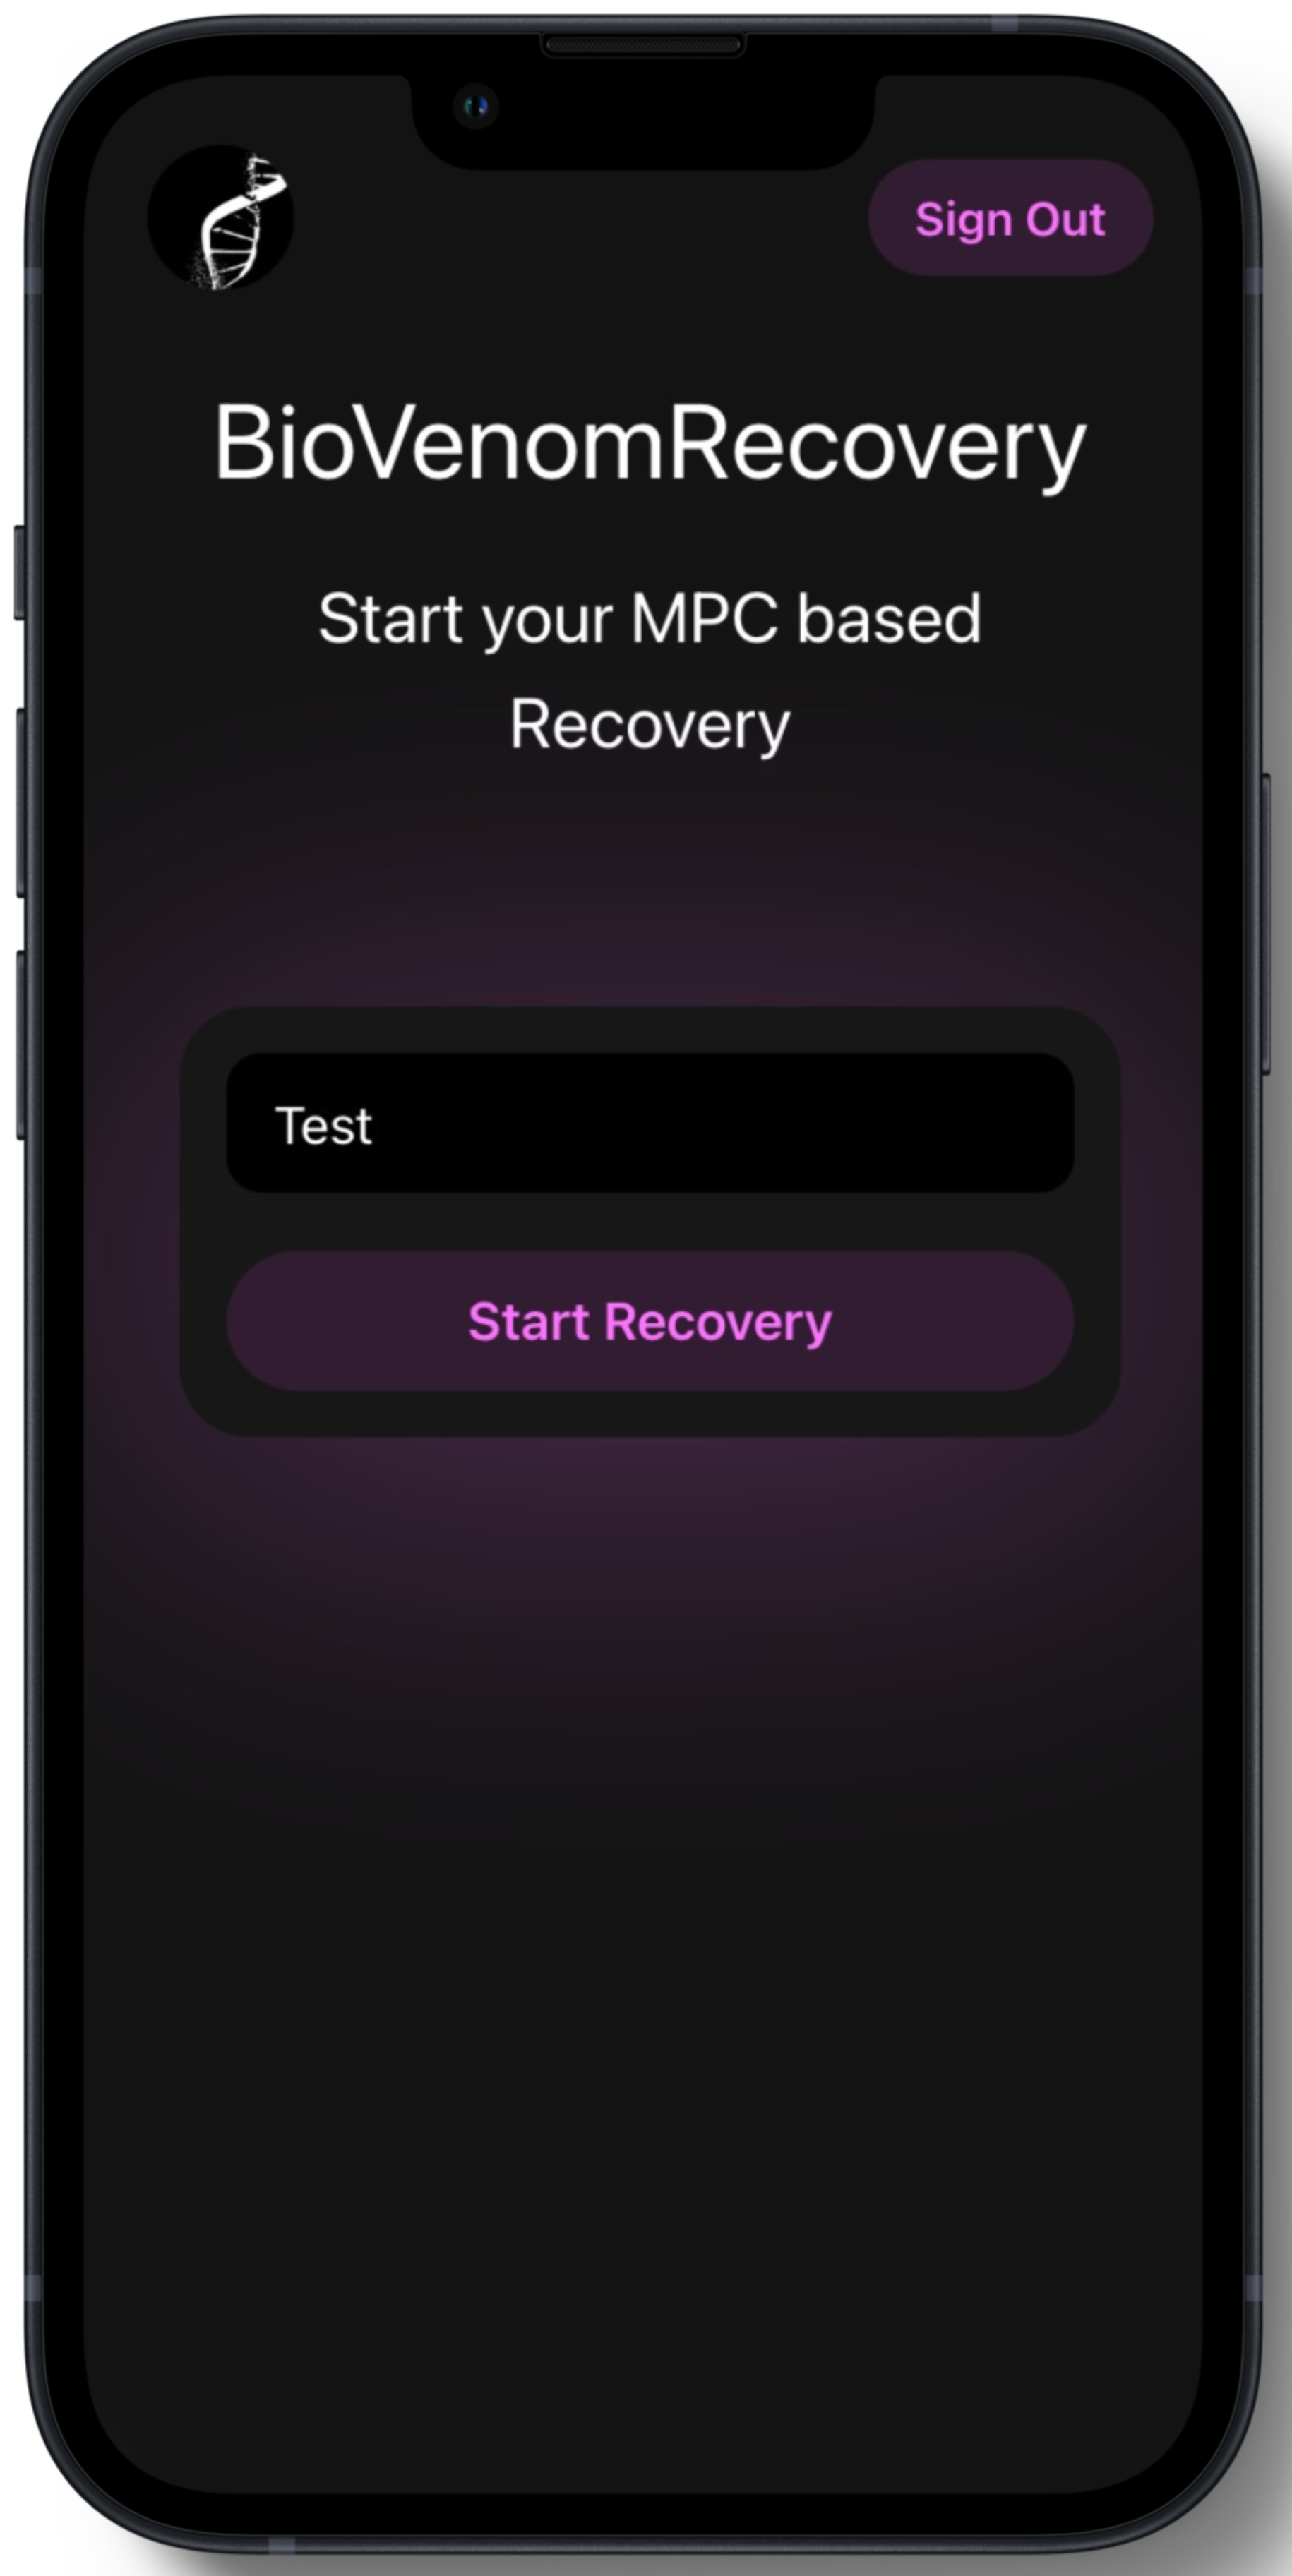 MPC Based Recovery